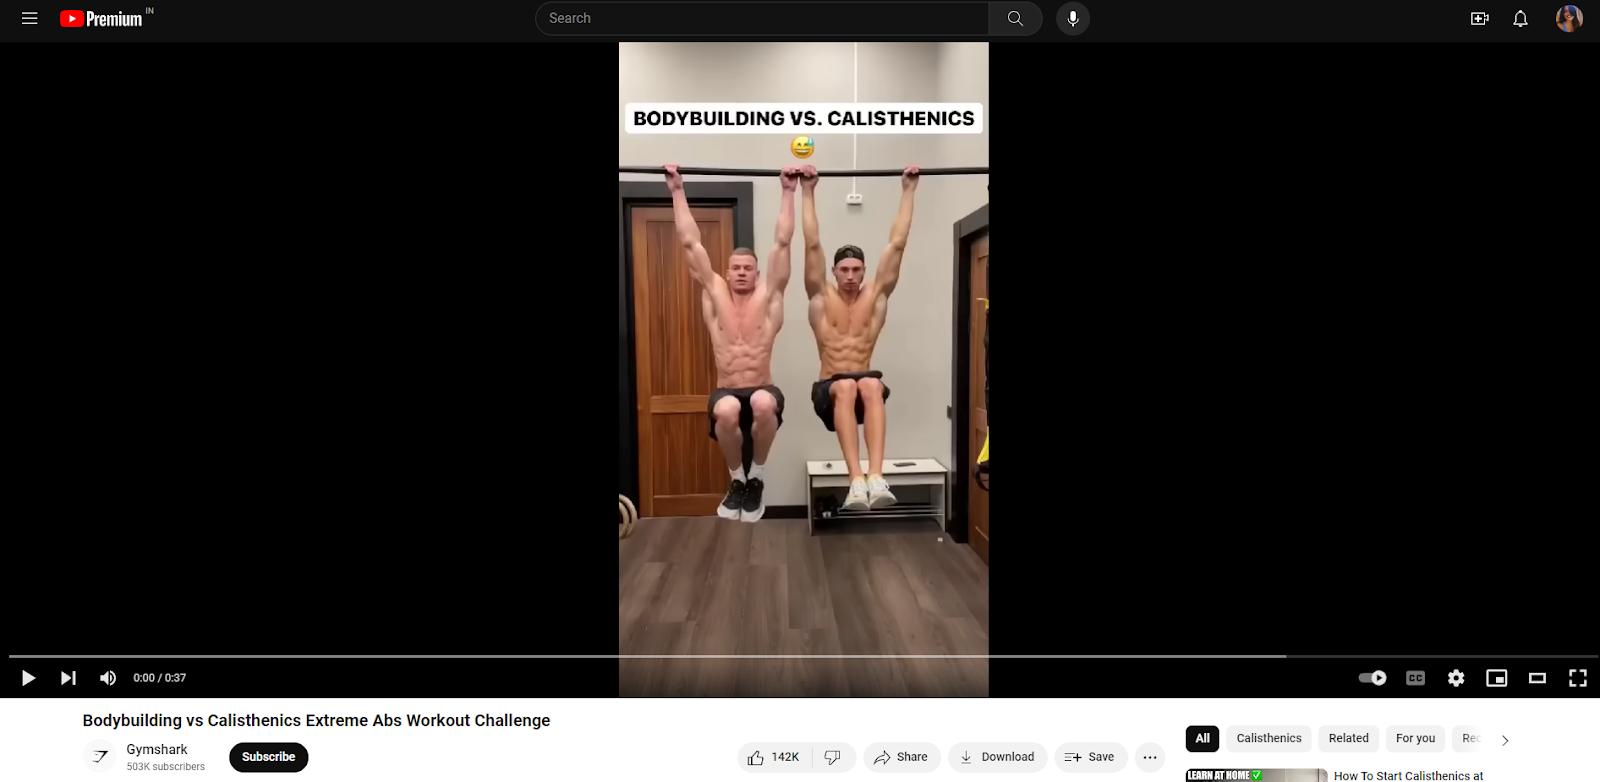 Keyhole - 🔥 Gymshark's Social Media Strategy - Making Fitness Fashionable!  🔥 Did you know that Gymshark, a fitness apparel brand, started off in a  home garage with just a simple screen